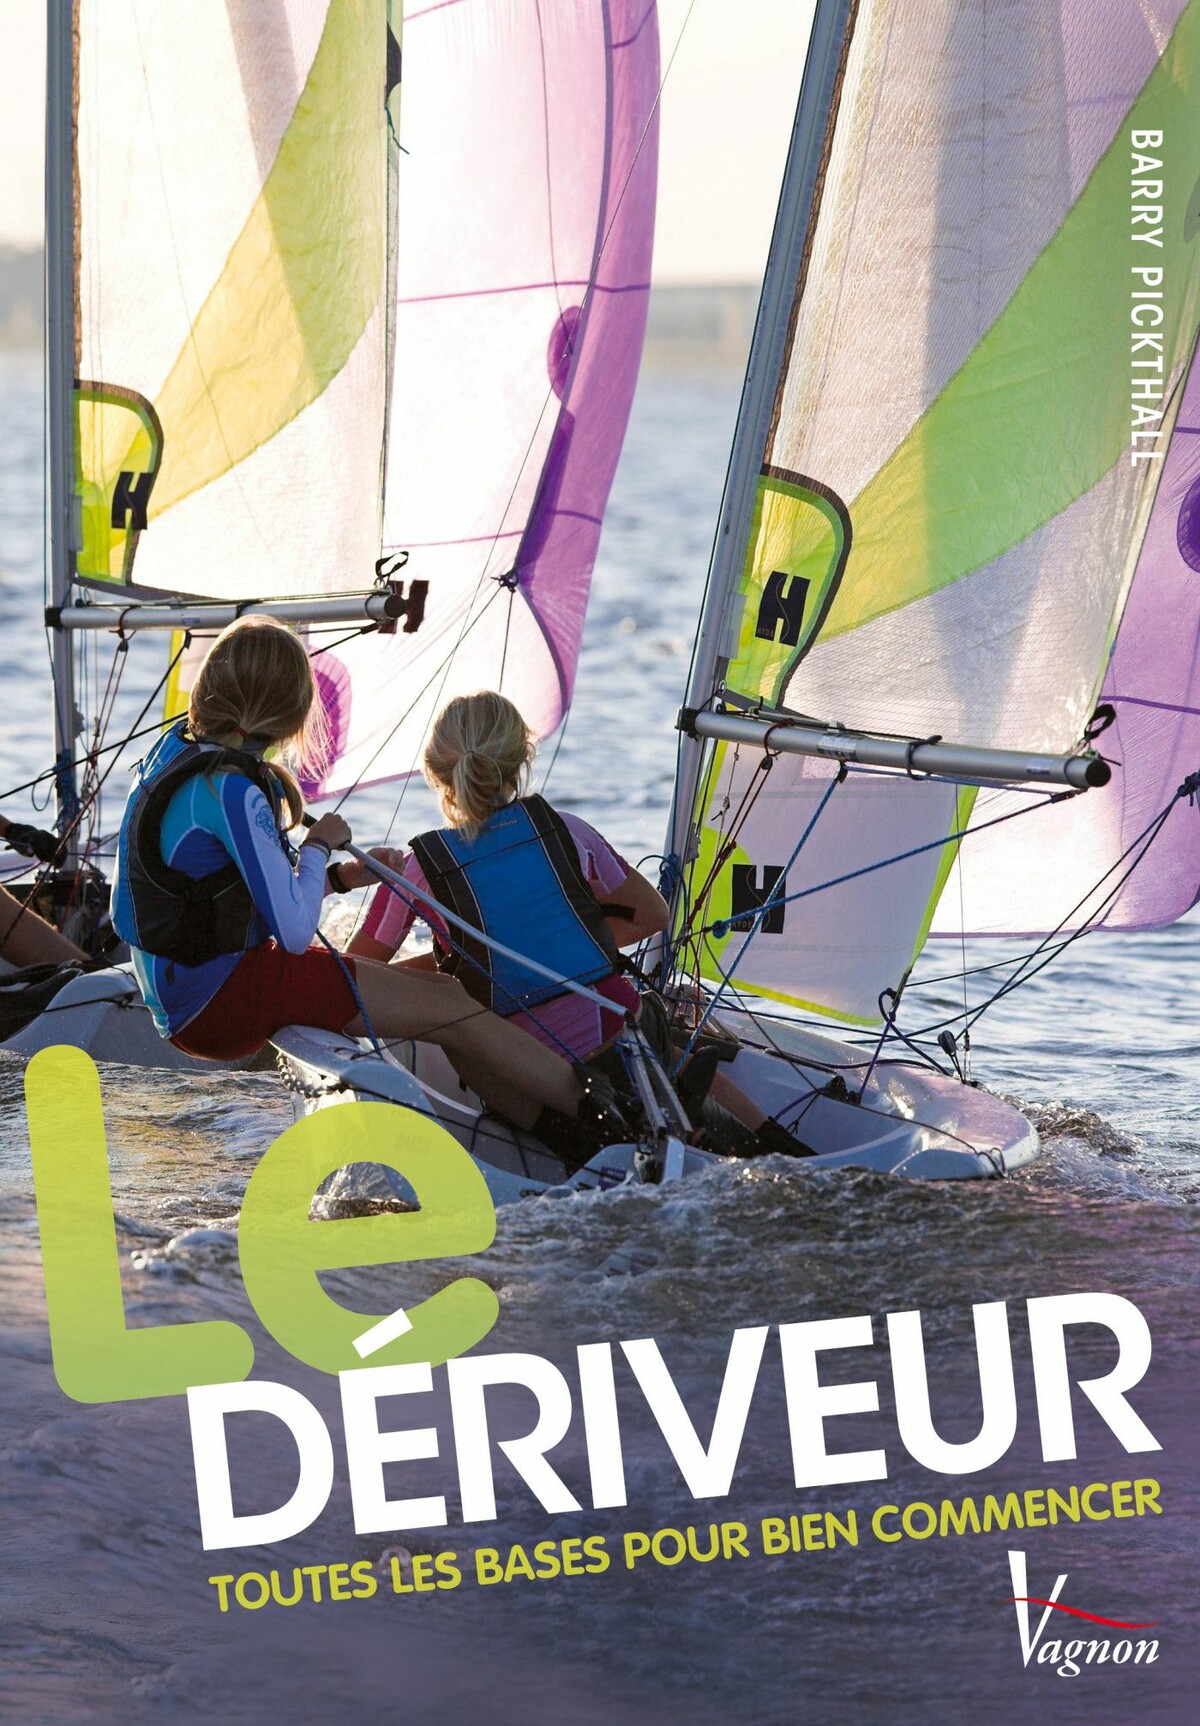 Traduction de Go Dinghy Sailing, éditions Vagnon/ Translation of "Go dinghy sailing" from English to French